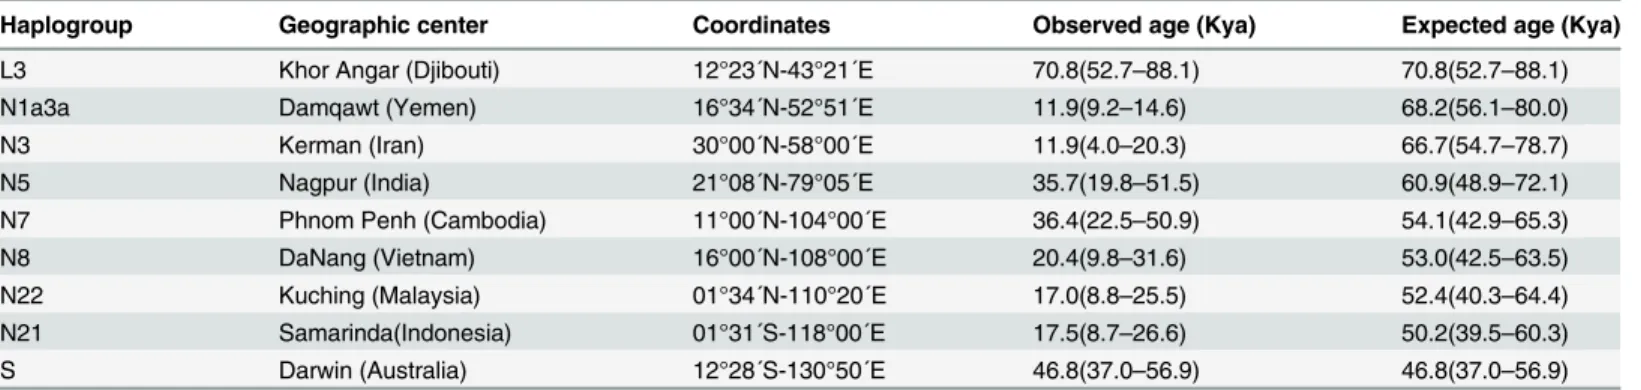 Table 2. Coordinates for haplogroups assigned to the southern route with observed and expected age values.